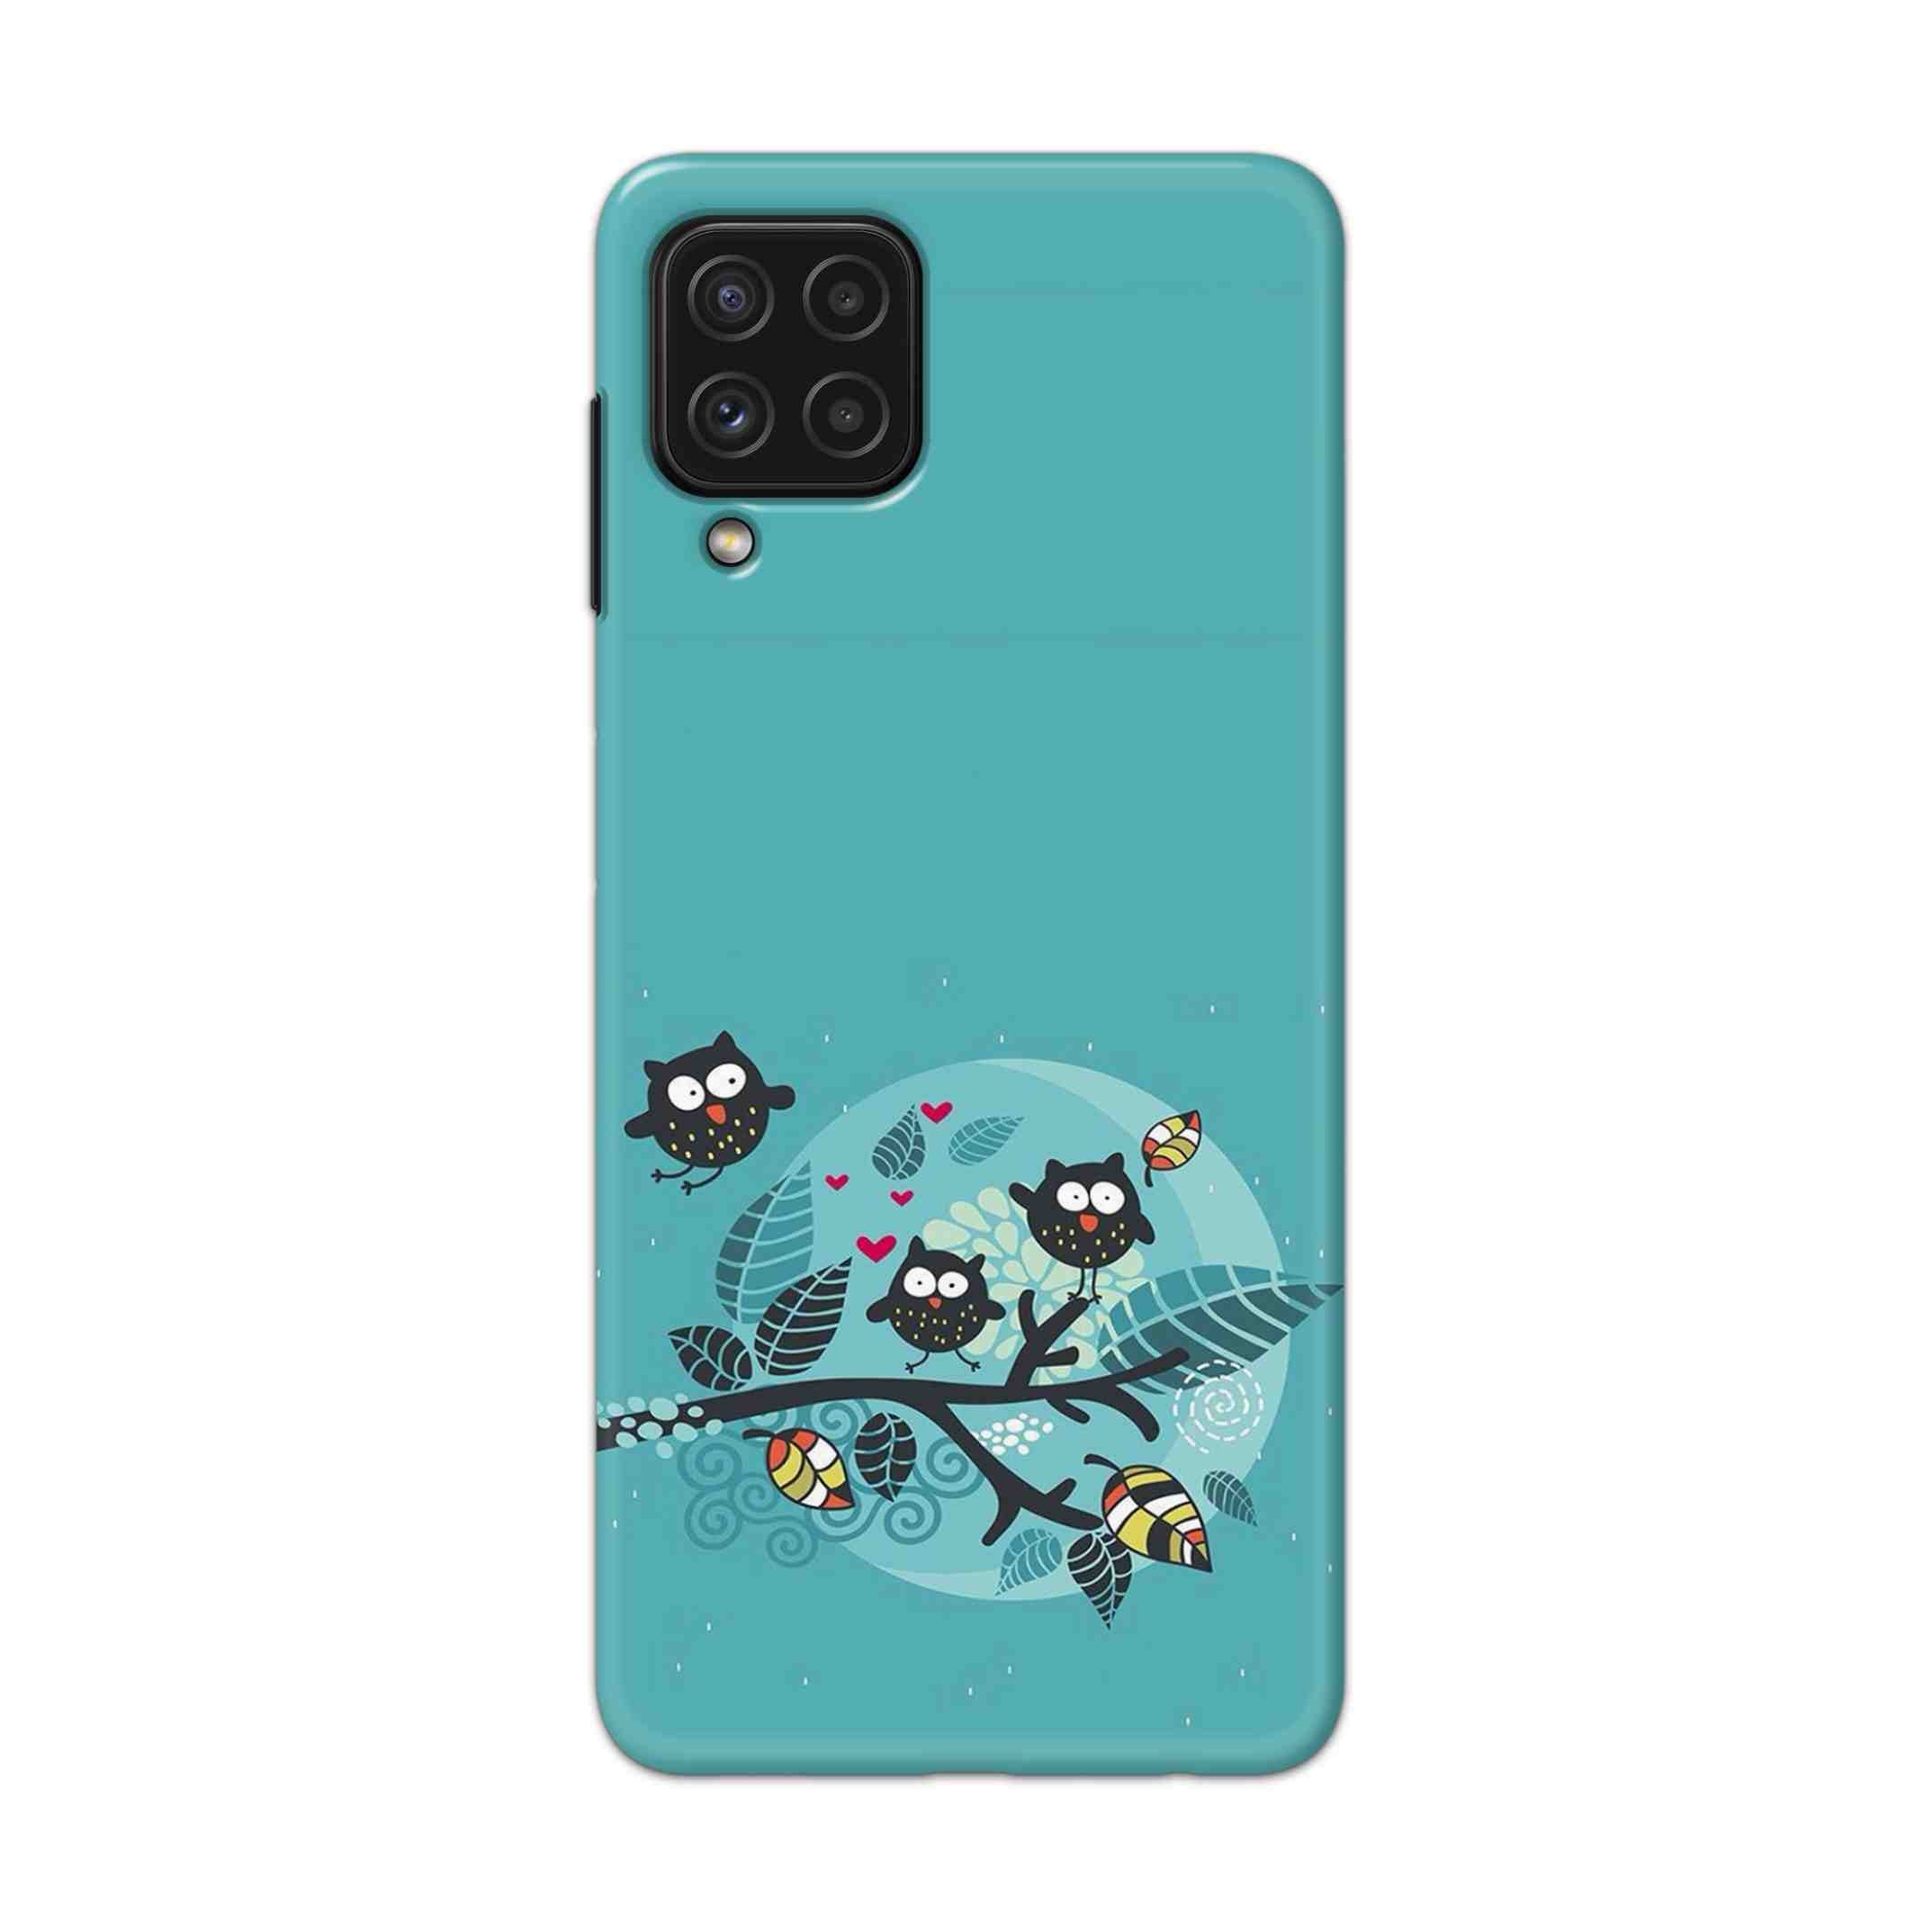 Buy Owl Hard Back Mobile Phone Case Cover For Samsung Galaxy A22 Online